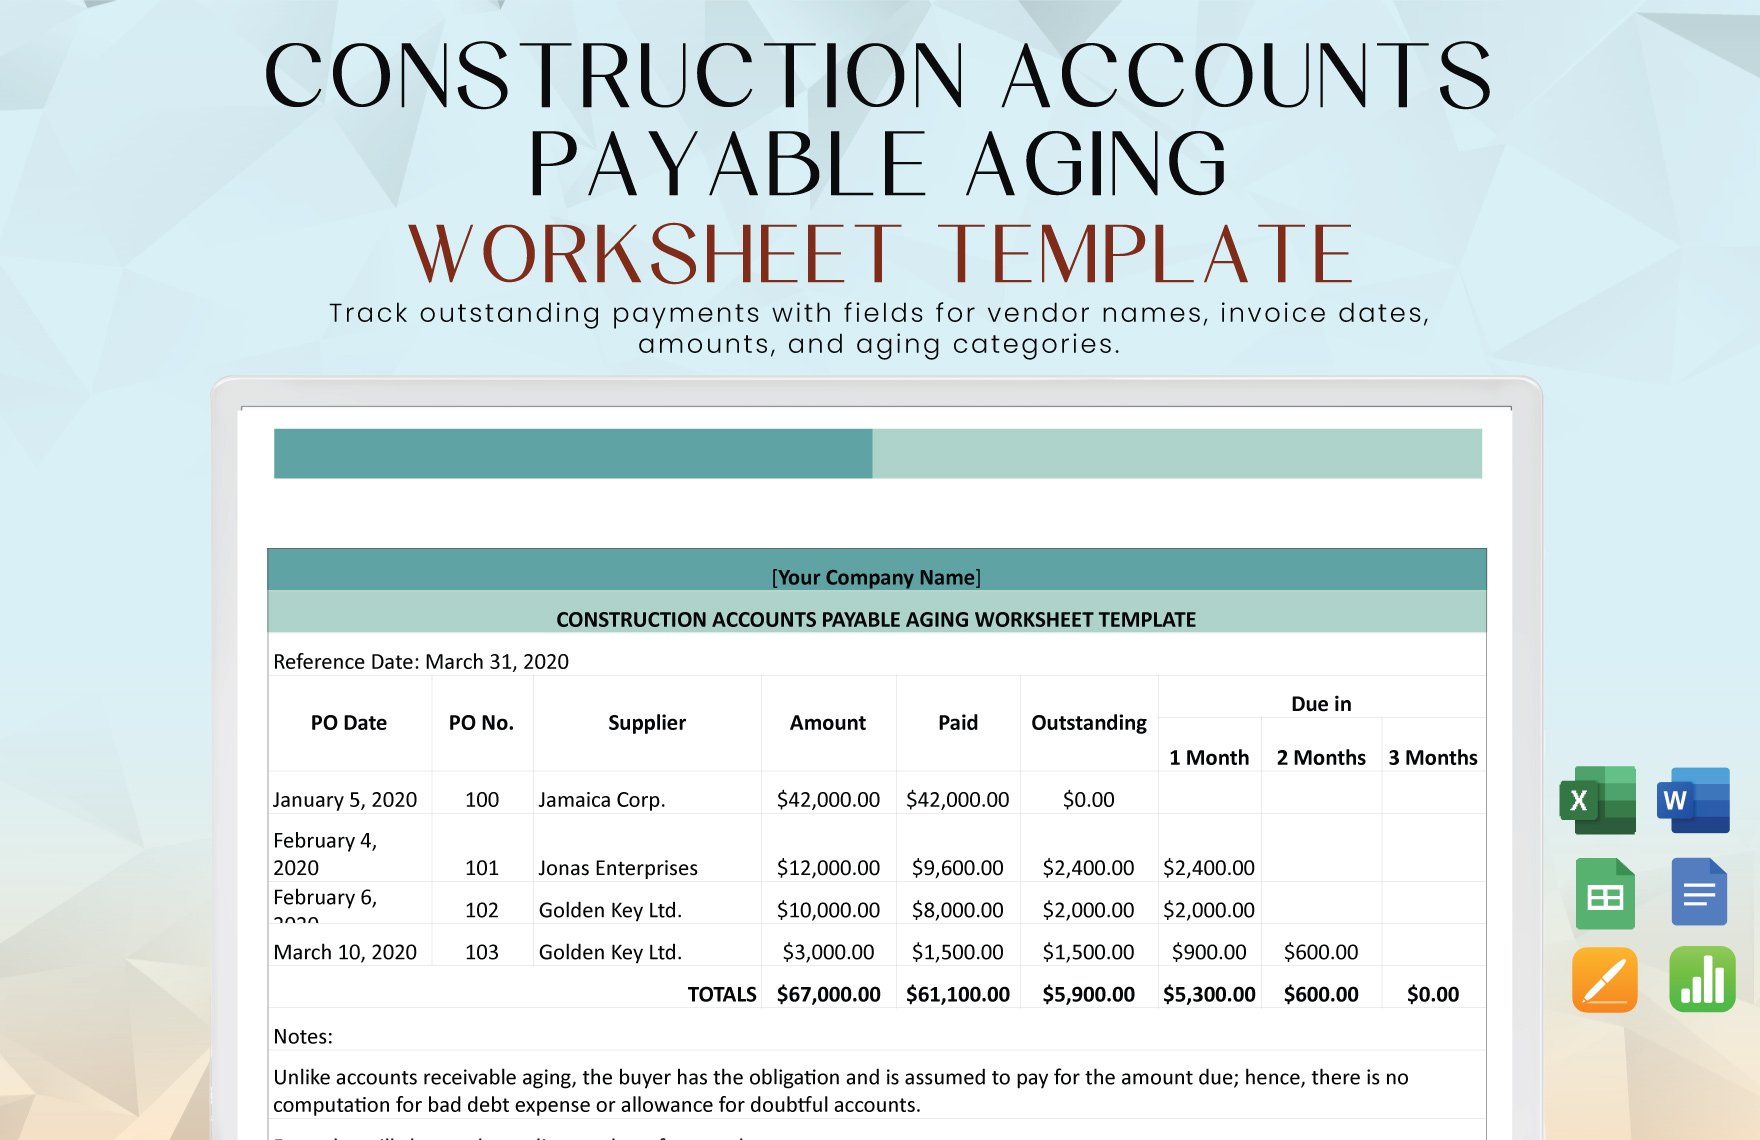 Construction Accounts Payable Aging Worksheet Template in Word, Google Docs, Excel, Google Sheets, Apple Pages, Apple Numbers